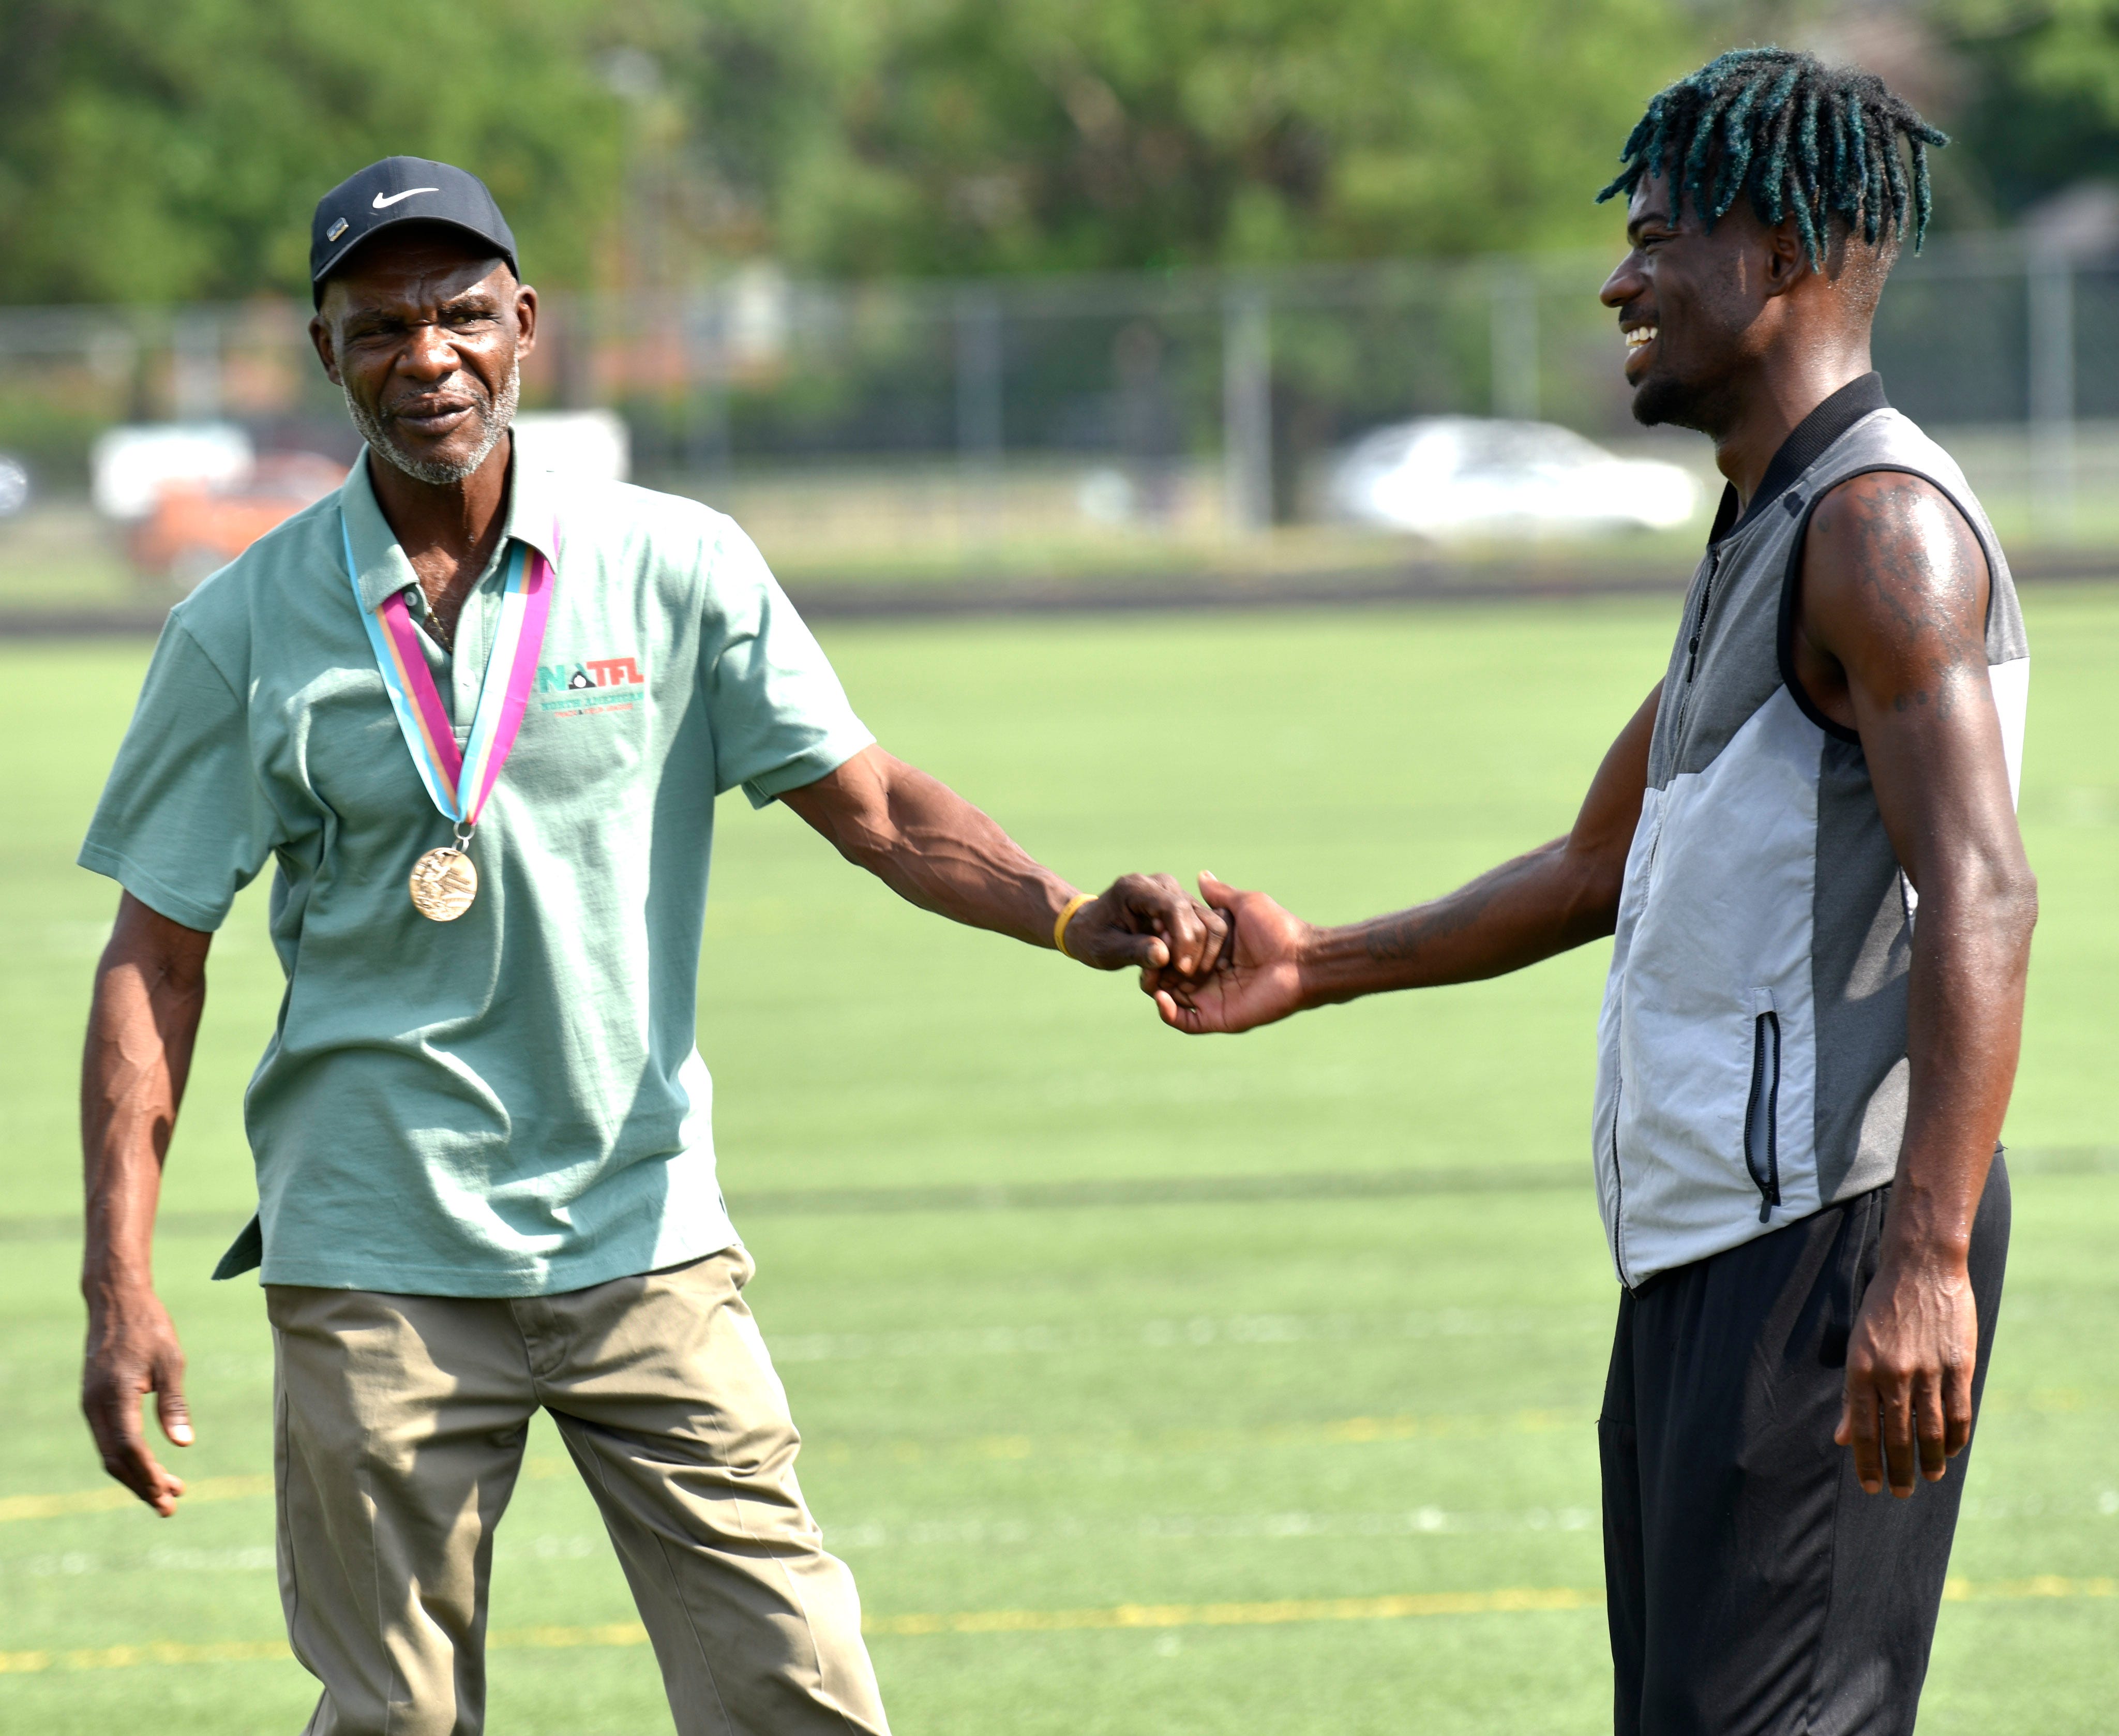 Earl Jones, left, shakes hands with runner Montel Lewis, 21, of Detroit, Saturday morning, Aug. 20, 2022. Jones won a bronze medal in the 800-meter run in the 1984 Olympics.